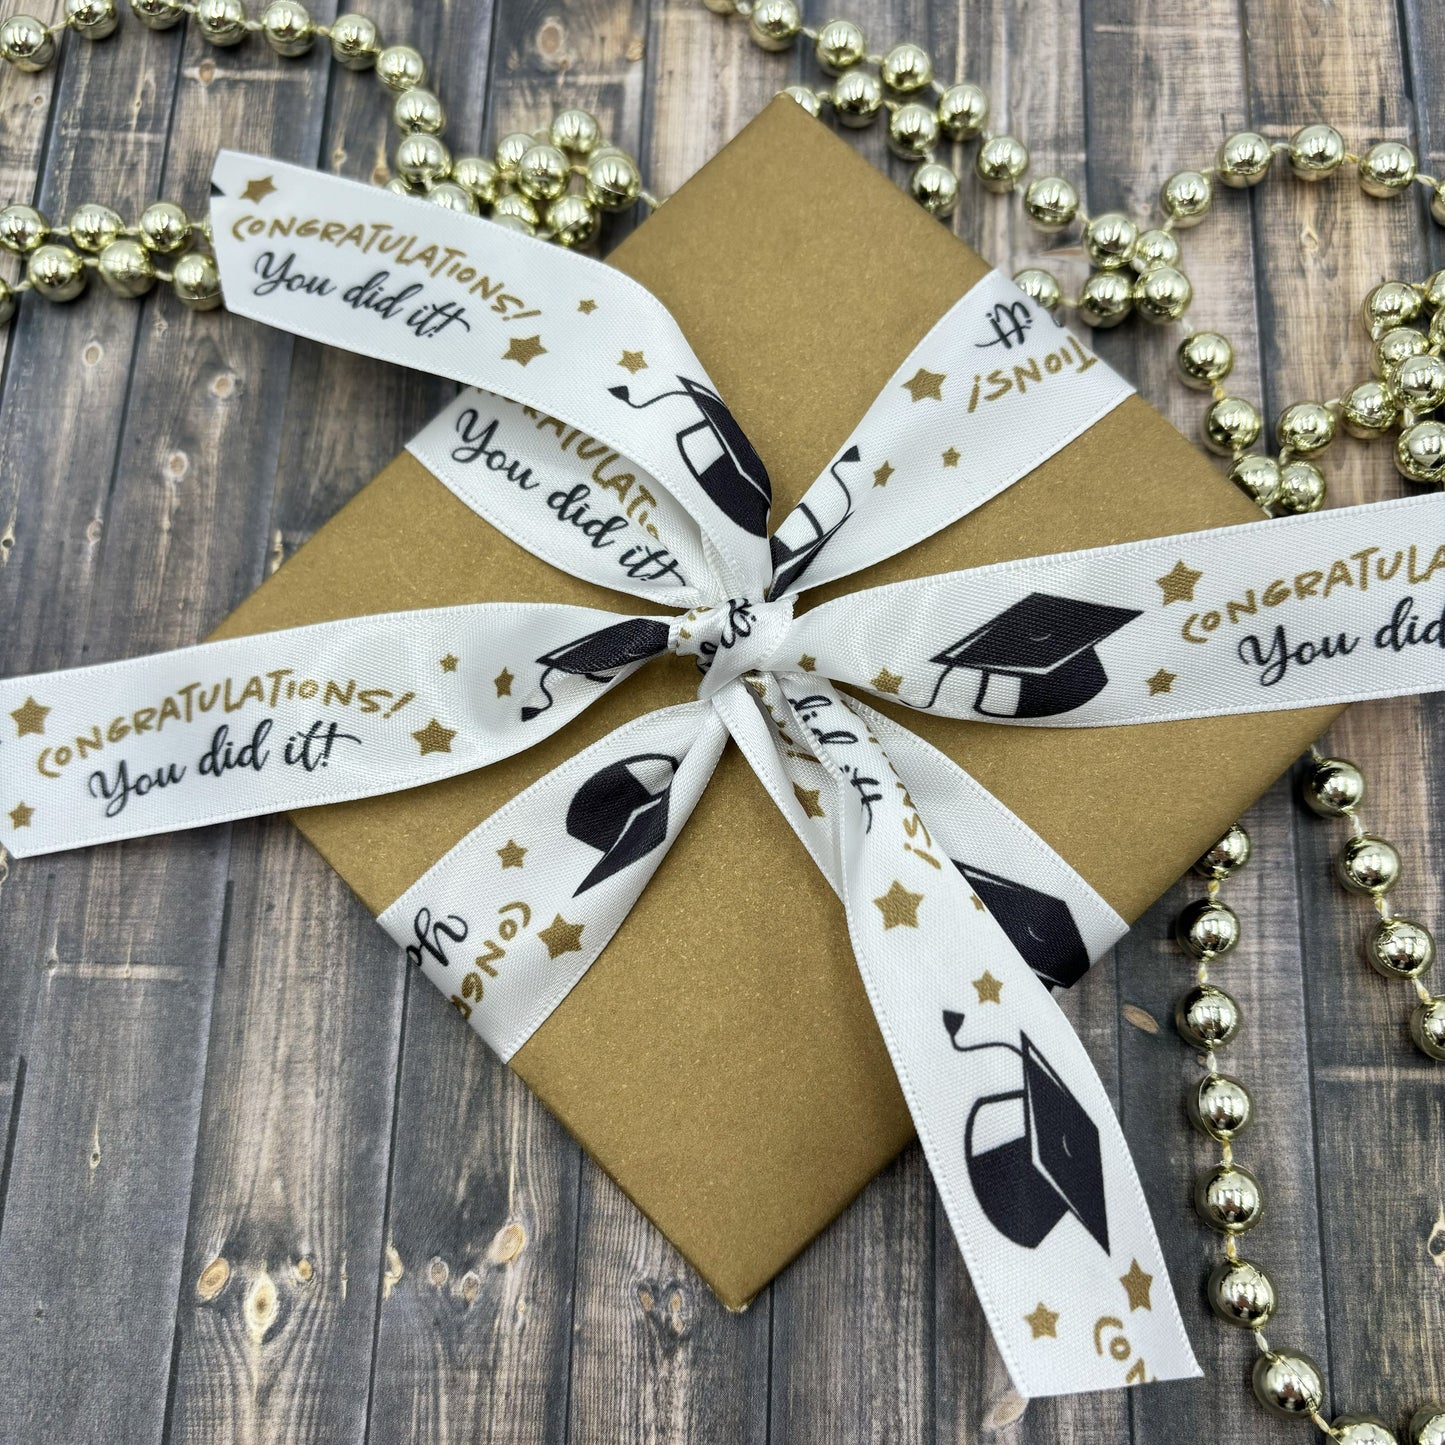 Graduation Ribbon You Did It printed in gold and black with gold stars printed on 7/8" white single face satin